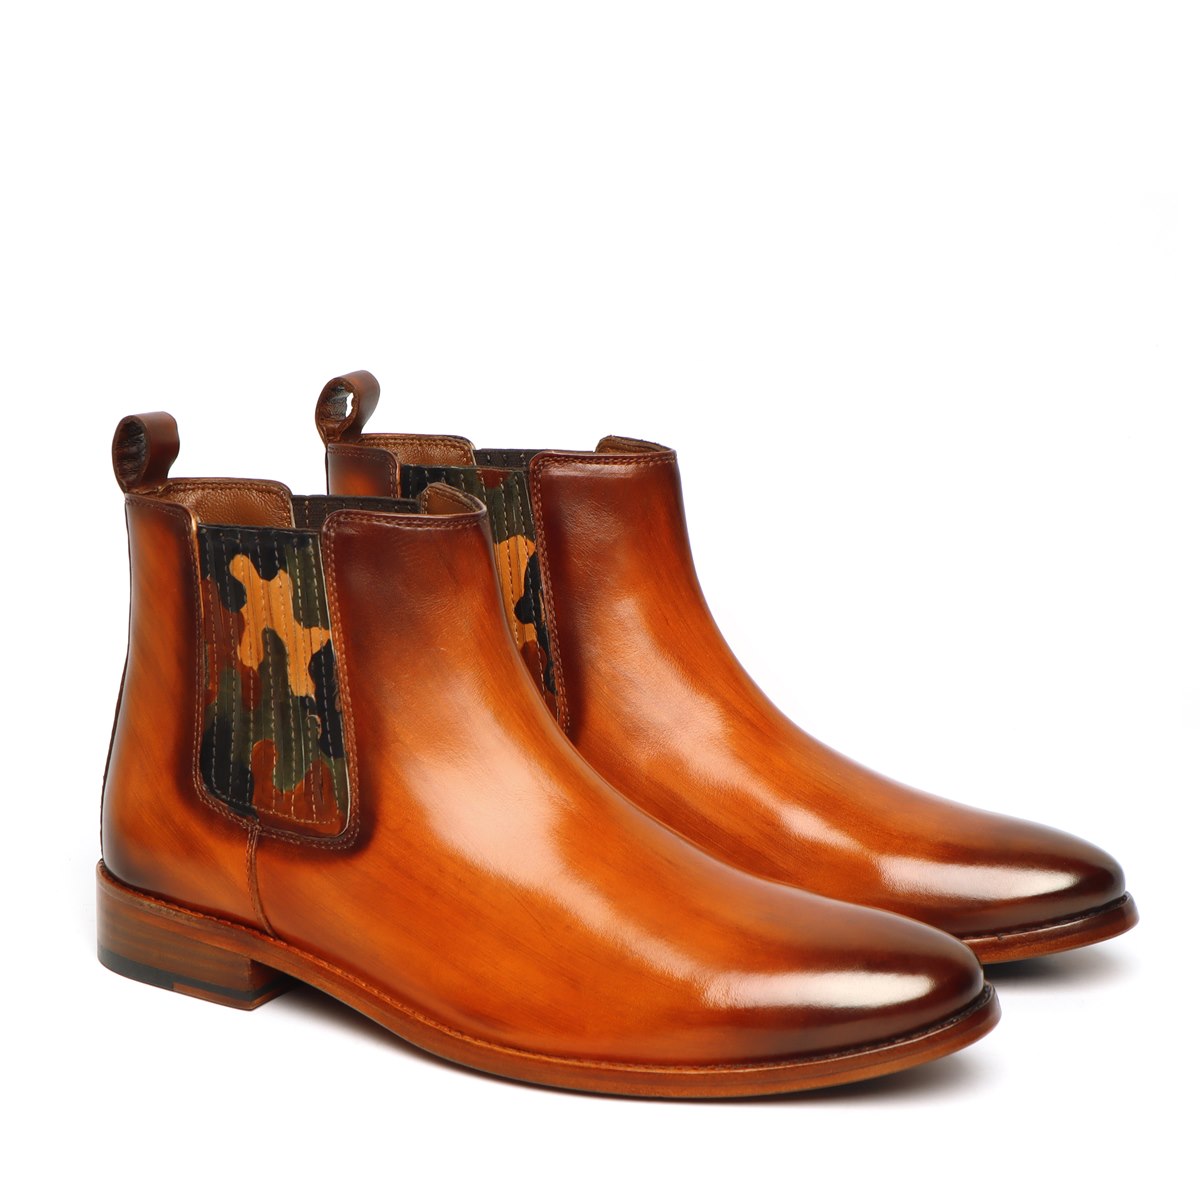 Orangish Tan Leather Camo Styled Hand Made Chelsea Boots For Men By Brune & Bareskin